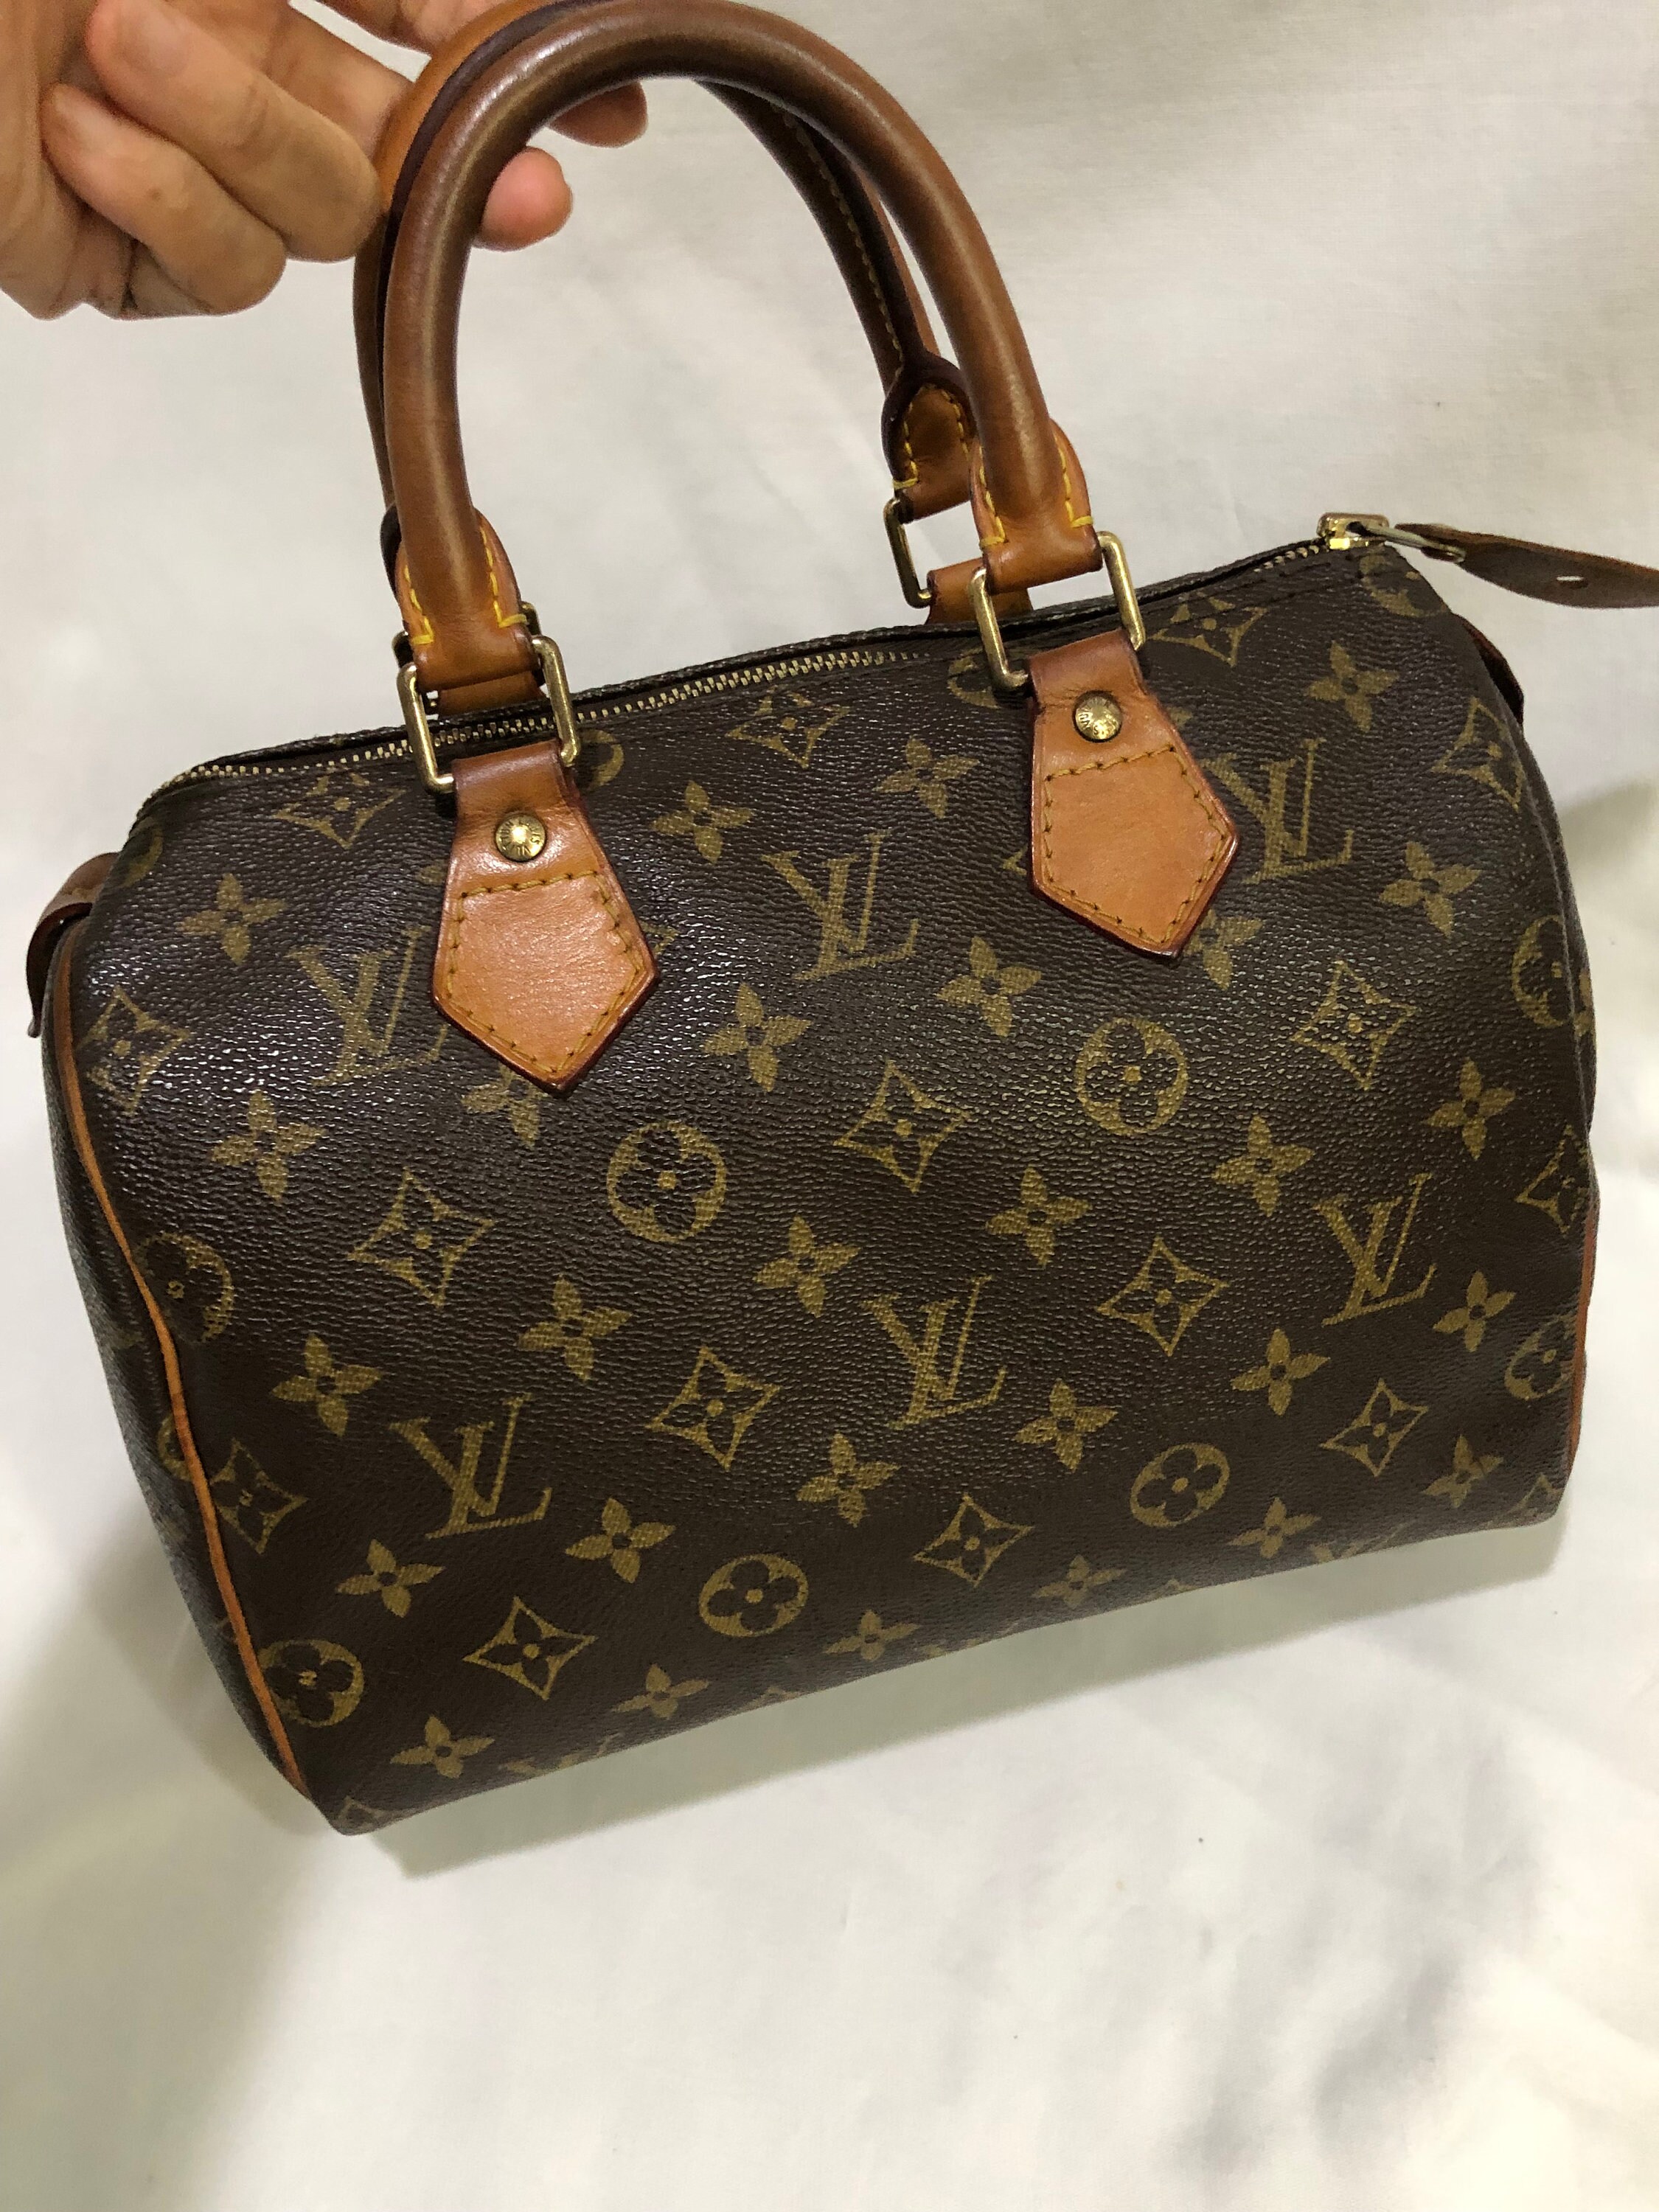 Satin Pillow Luxury Bag Shaper For Louis Vuitton Speedy 25/30/35/40  (Burgundy) - More colors available